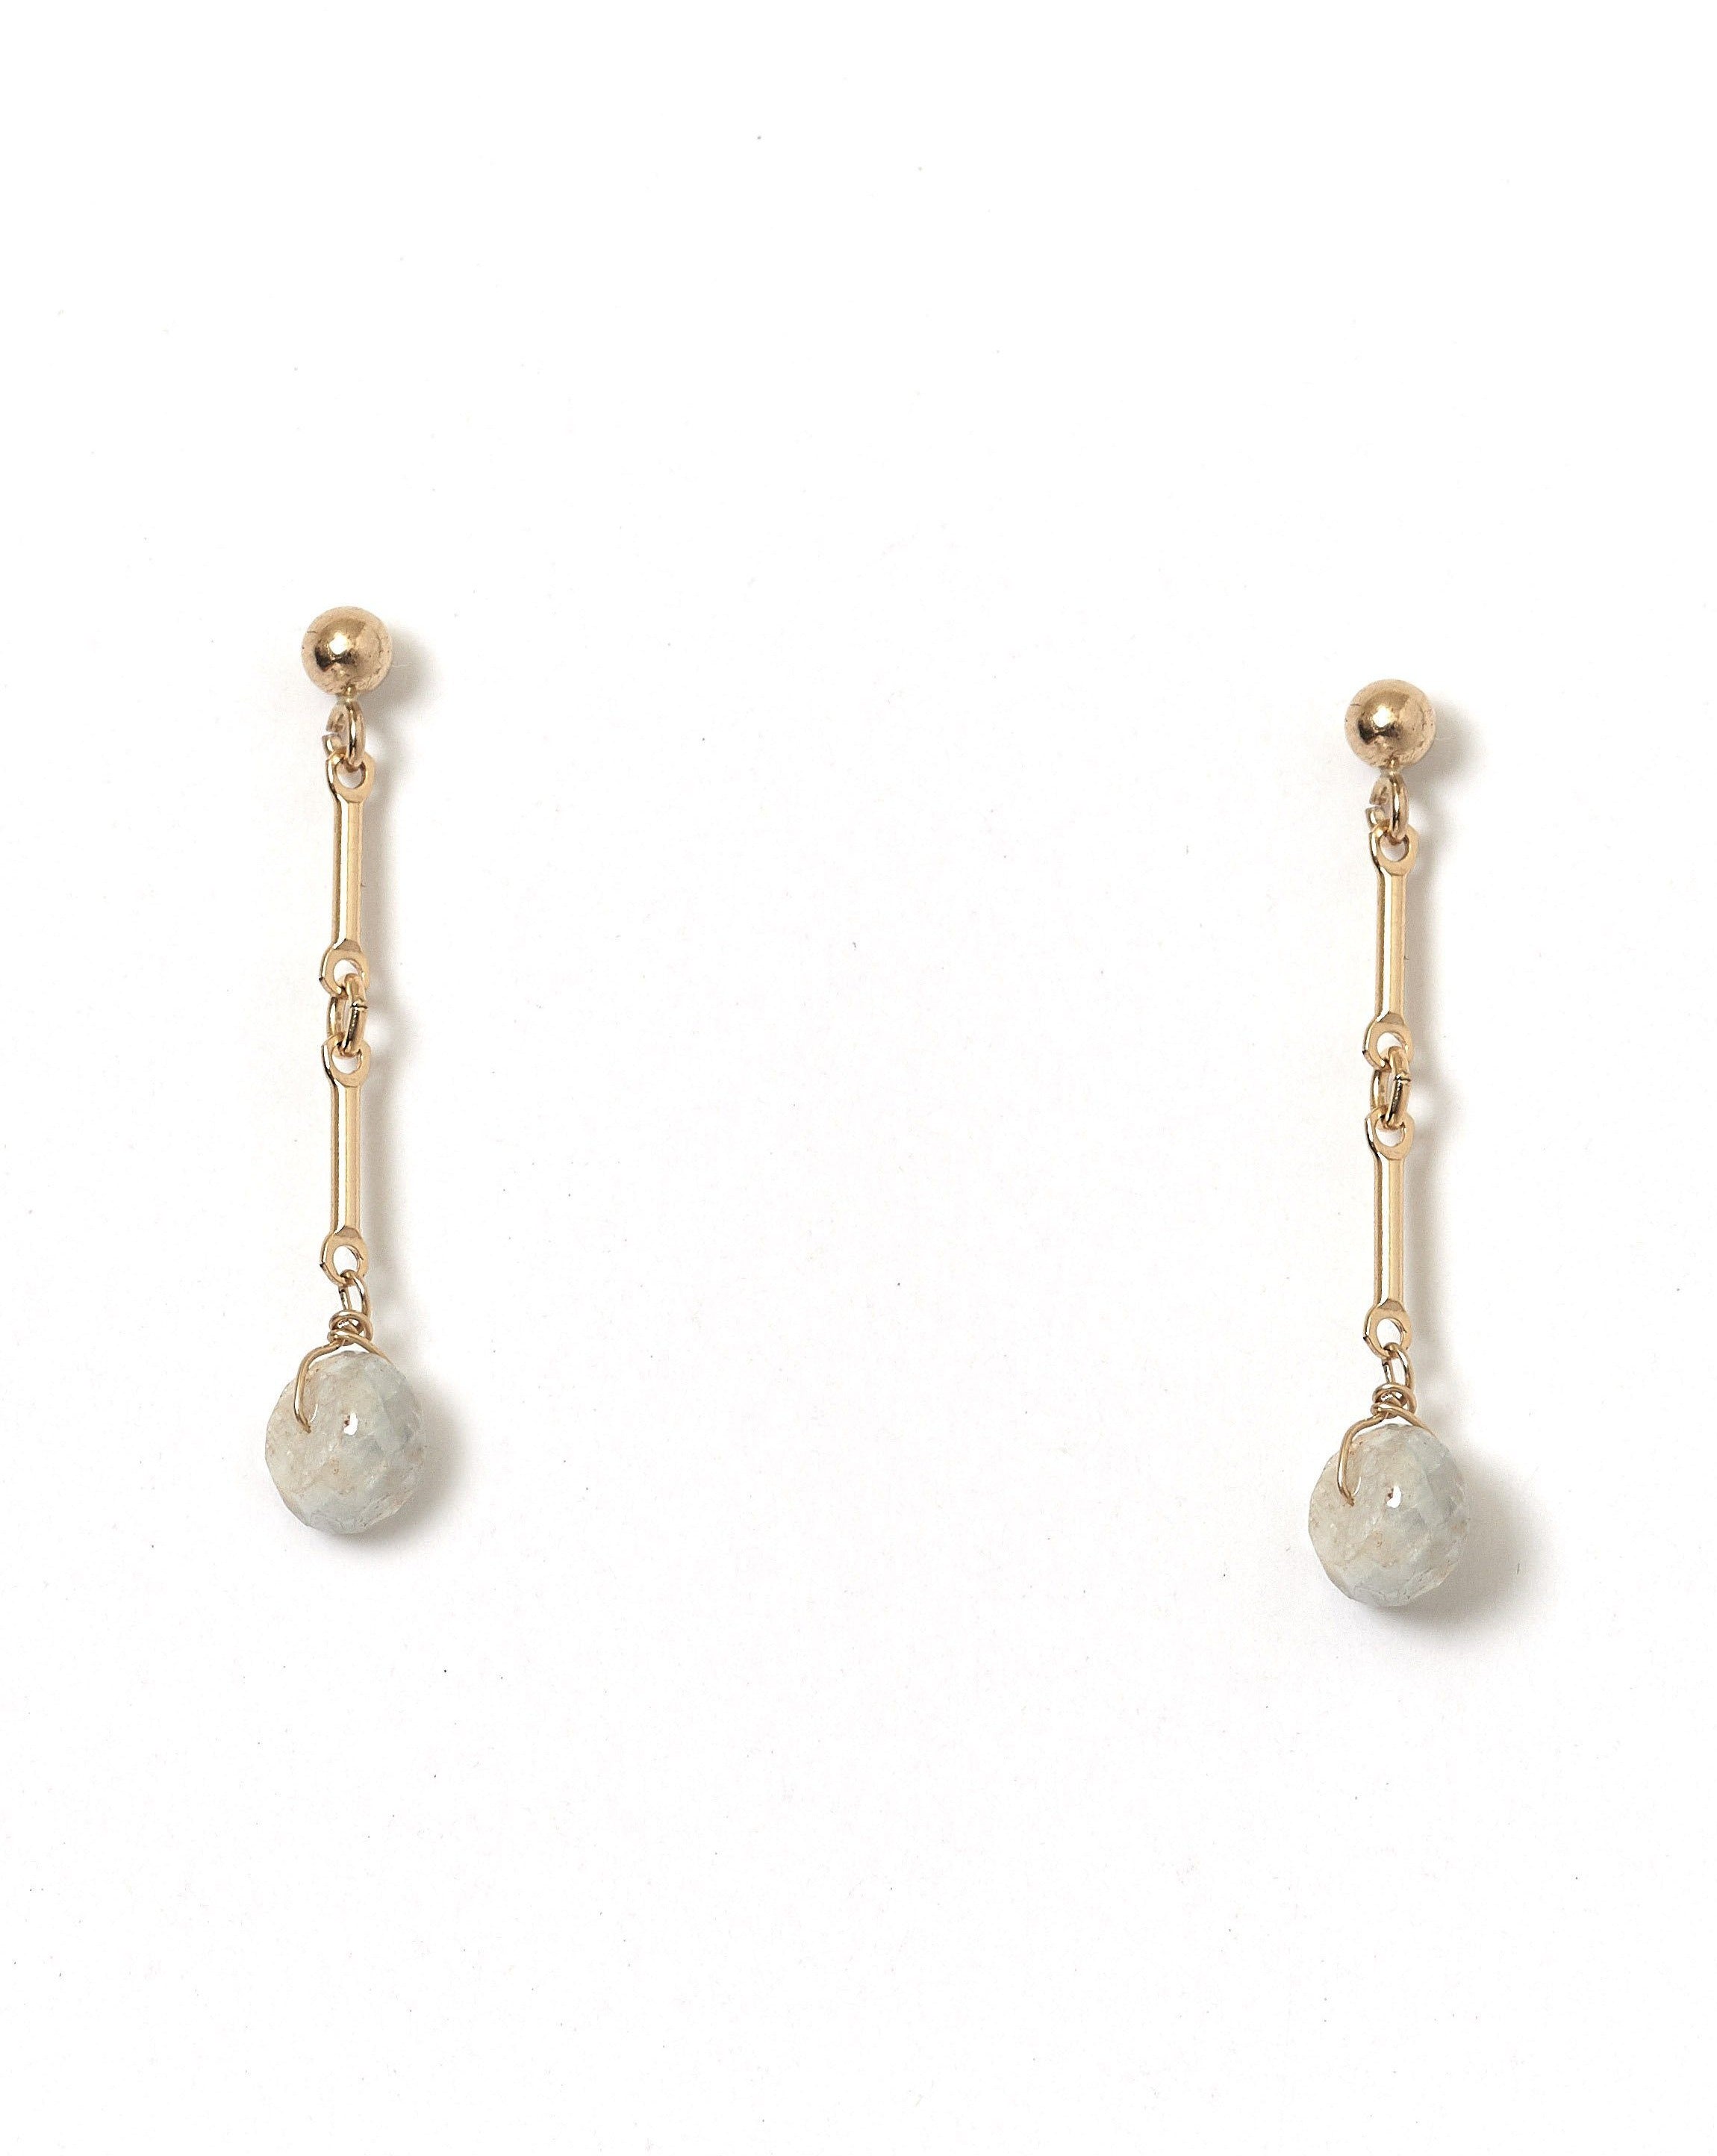 Desos Earrings by KOZAKH. 2 inch drop, 3mm Ball stud earrings, crafted in 14K Gold Filled, featuring a faceted White Sapphire rondelle.